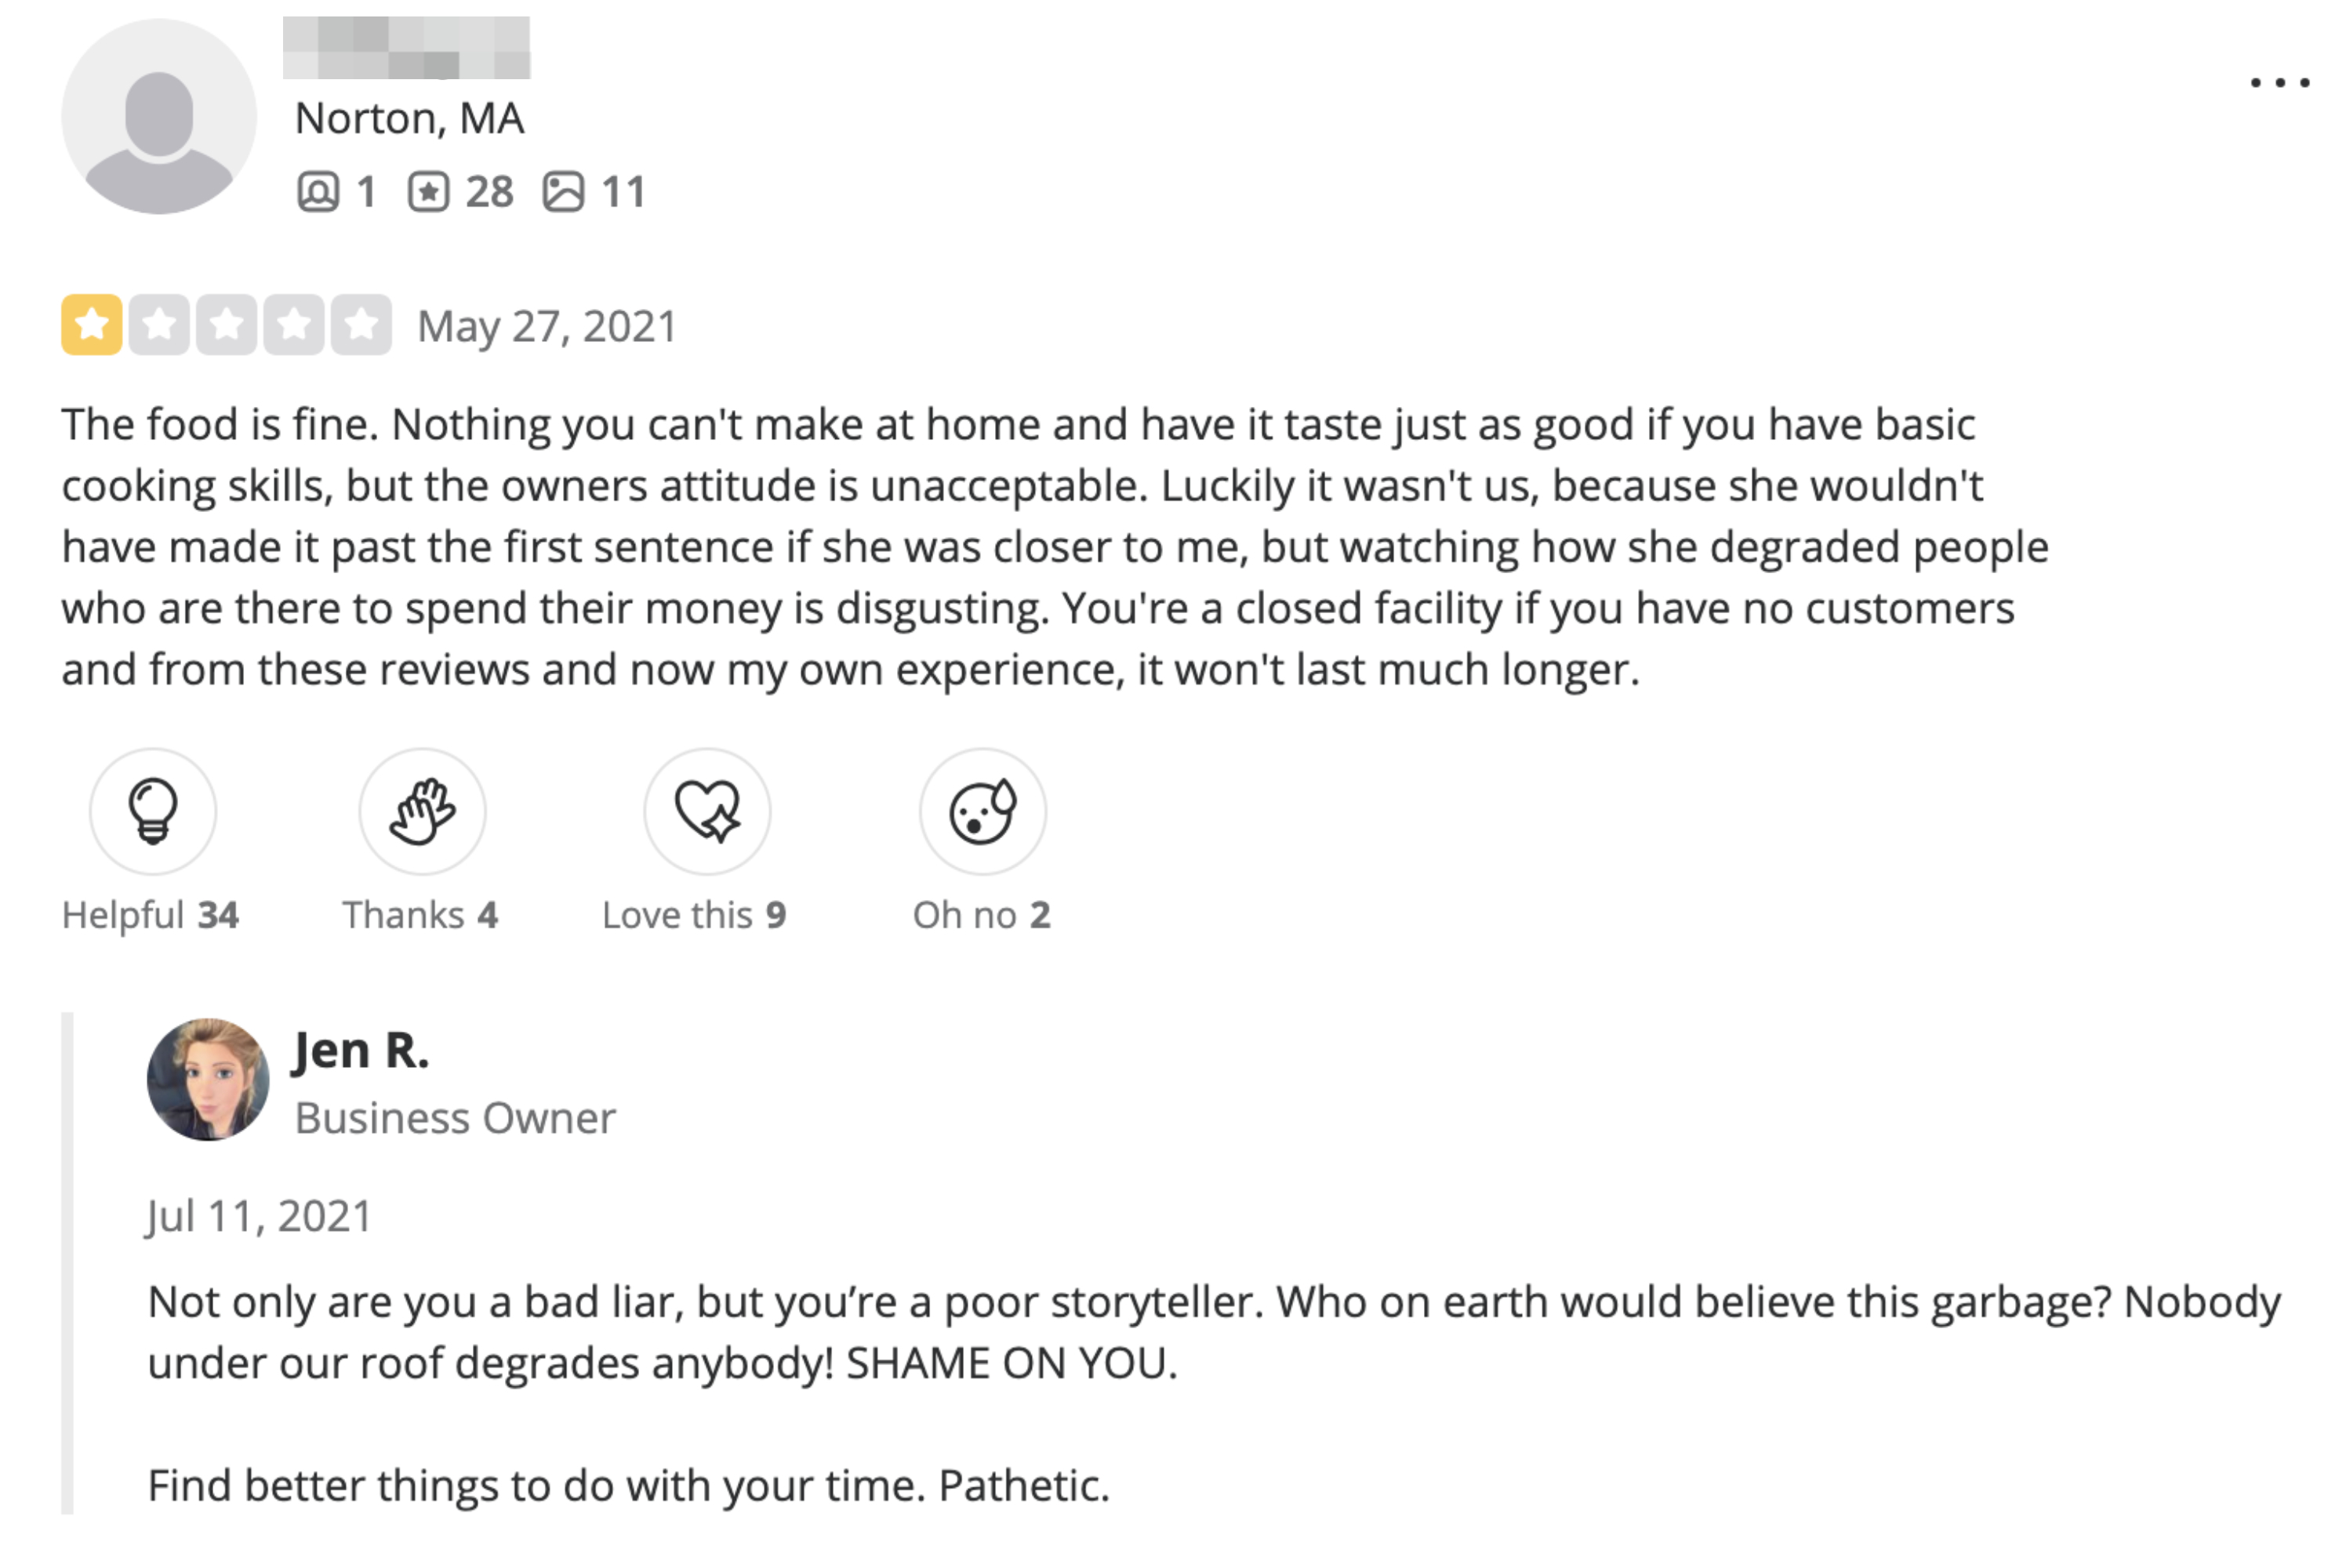 A 1 star review for Table from May 2021 that states the owner&#x27;s attitude was &quot;unacceptable&quot; and she degraded customers, with a response from Jen calling the reviewer a &quot;bad liar&quot; and &quot;poor storyteller&quot;